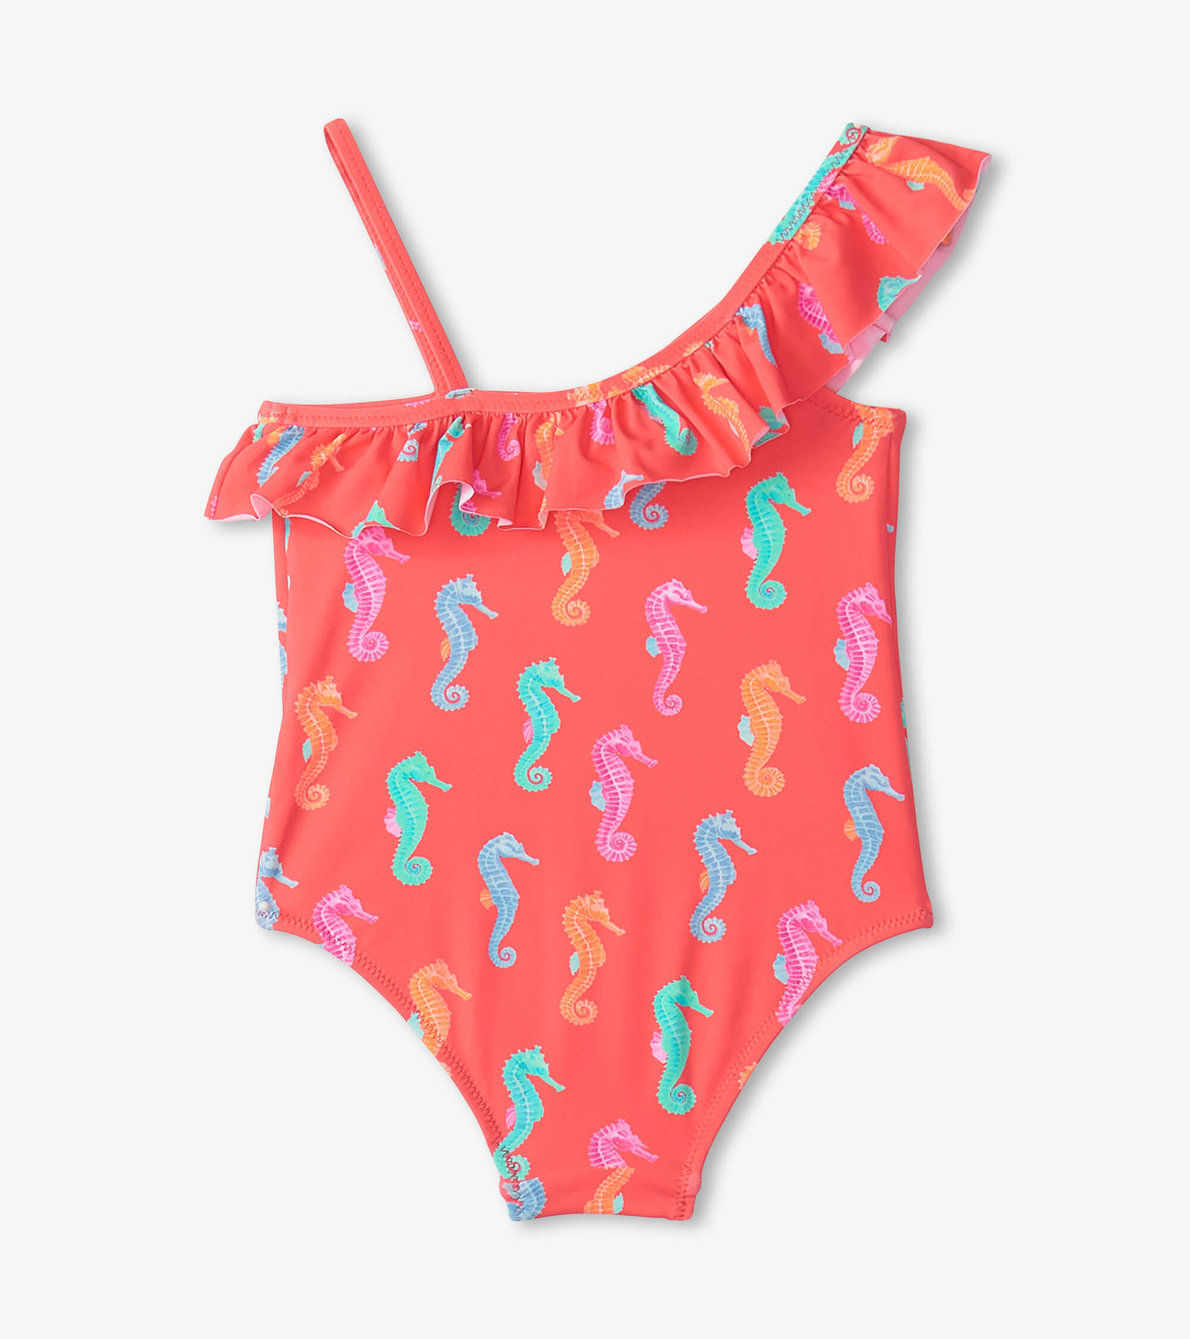 View larger image of Girls Painted Sea Horses Ruffle Trim Swimsuit